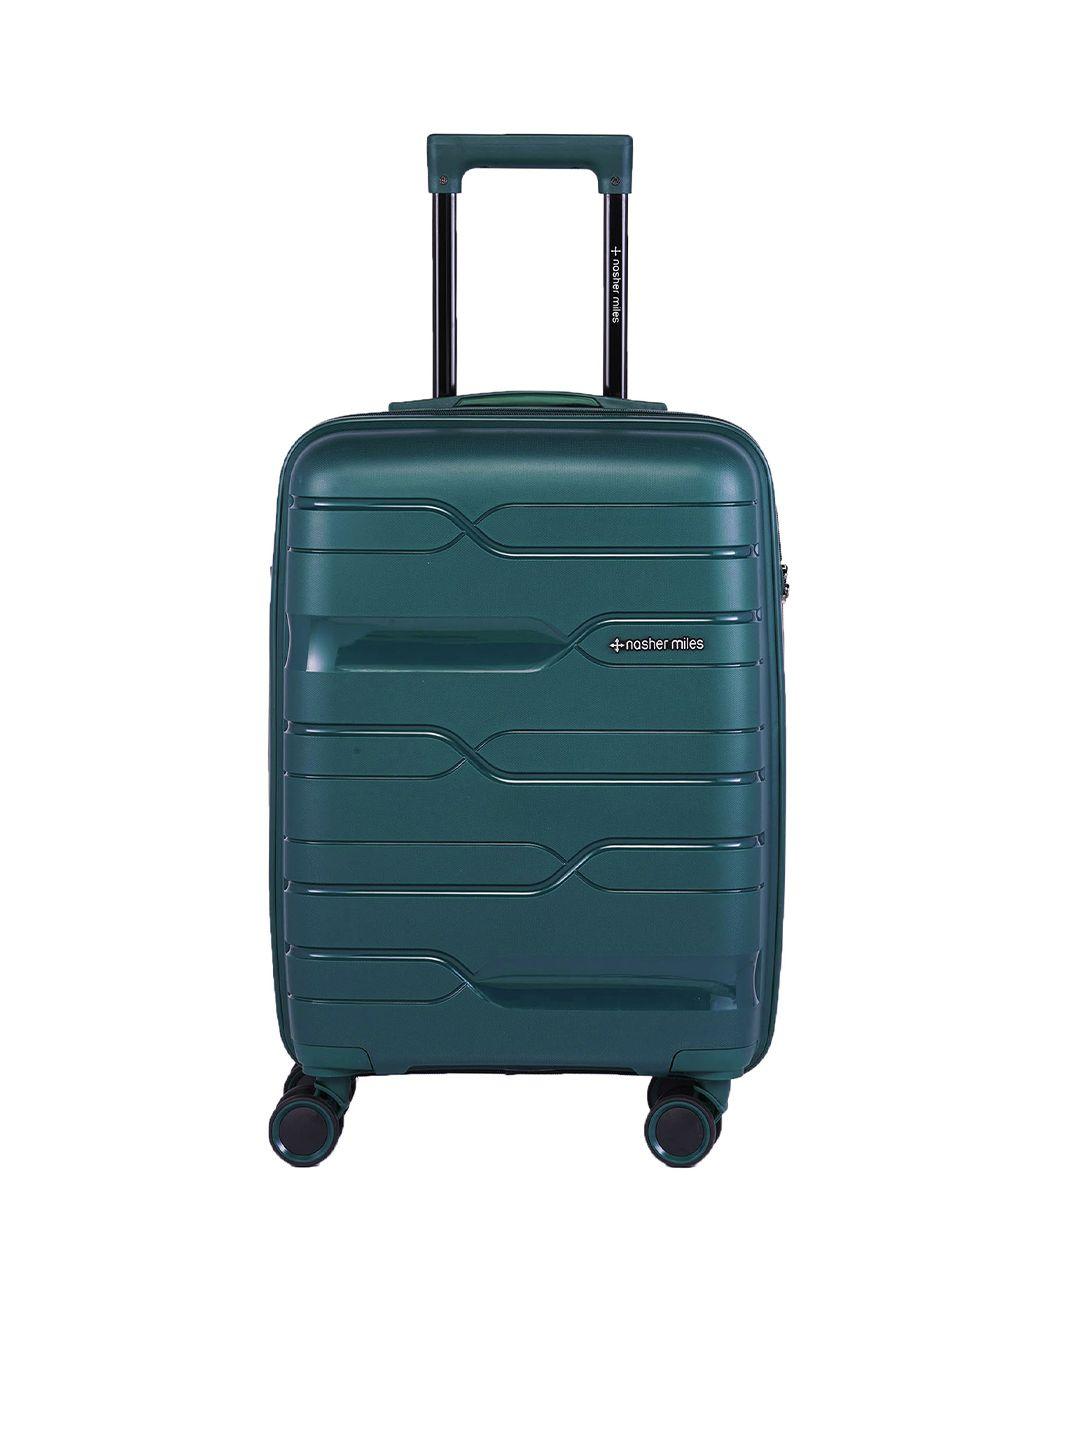 nasher miles green textured hard-sided cabin trolley suitcase